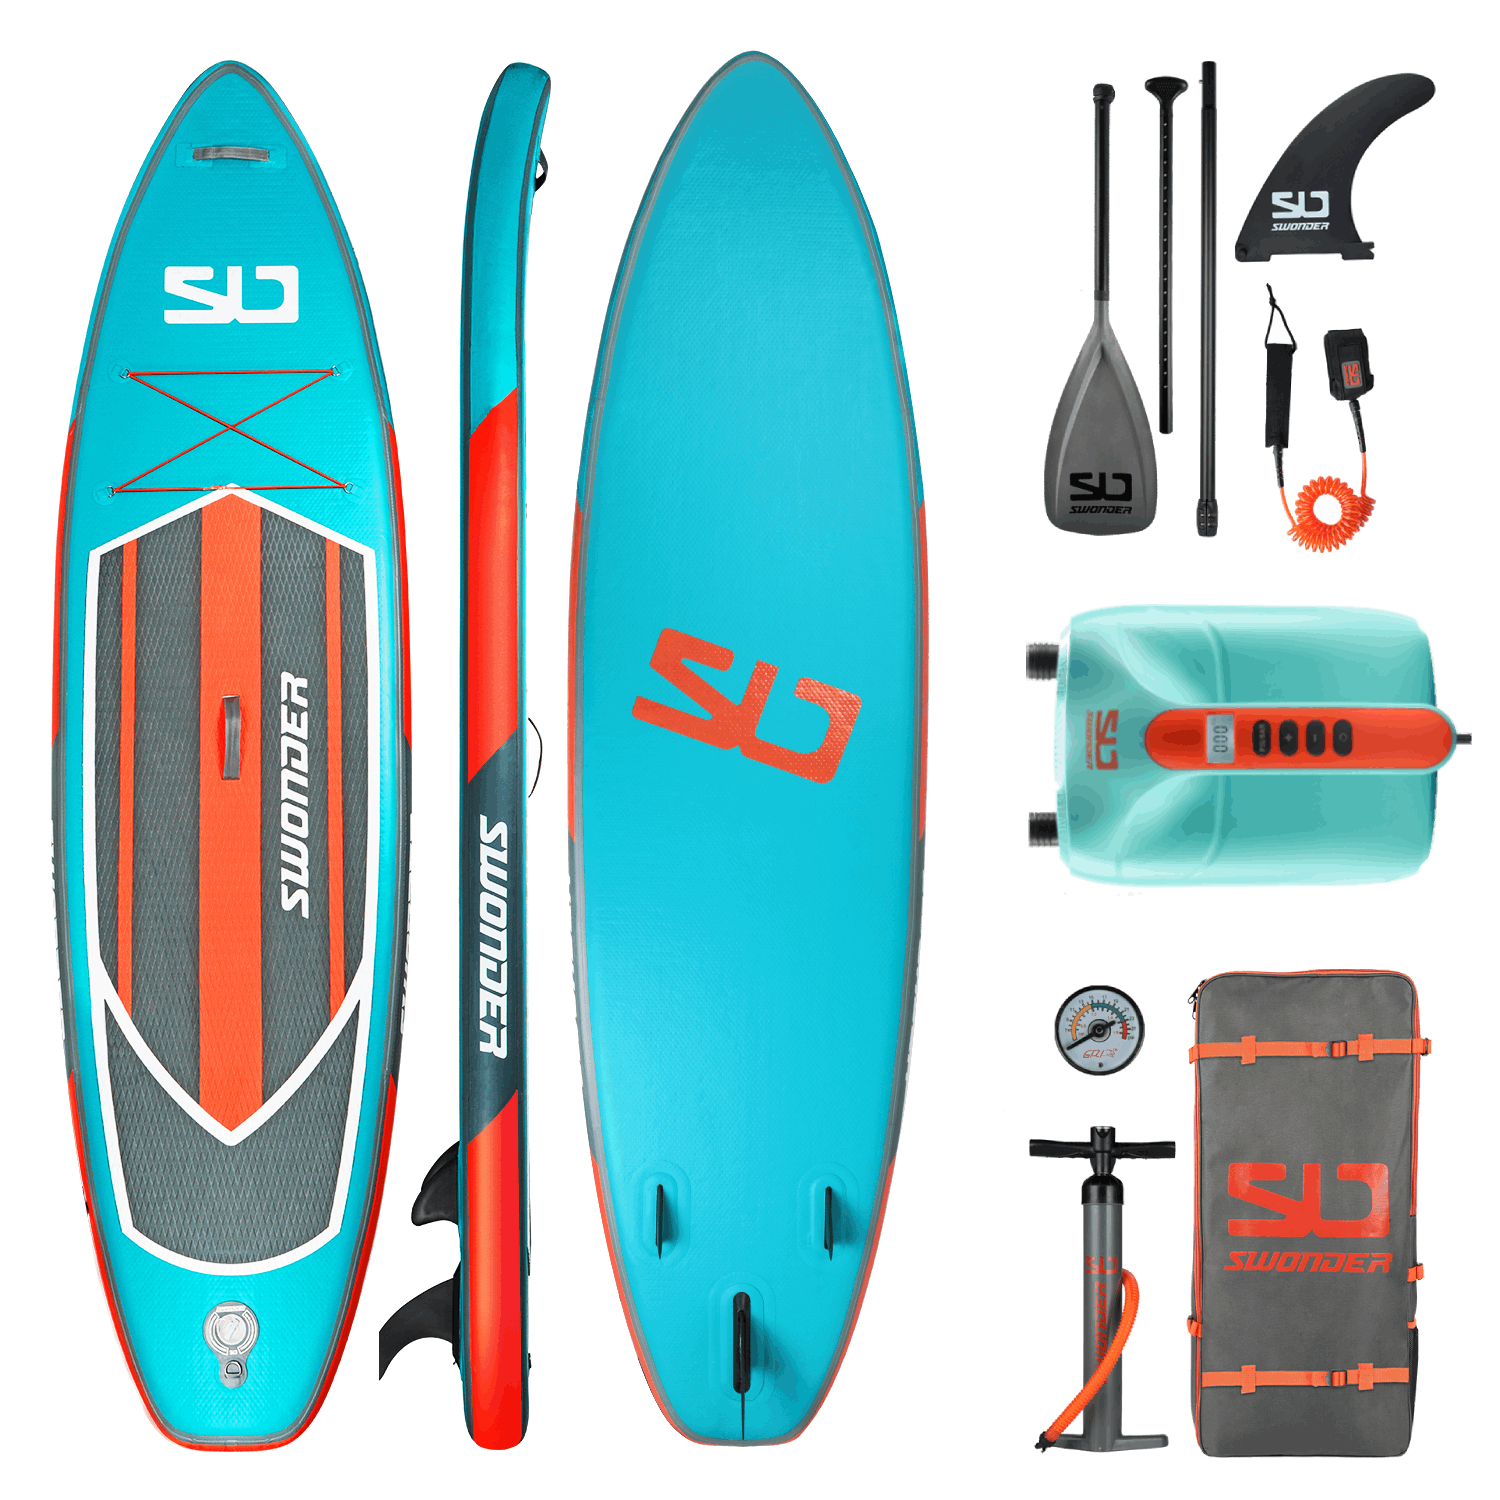 Bundle Deal - 11'6 Inflatable Stand up Paddle Board Set & E-Pump